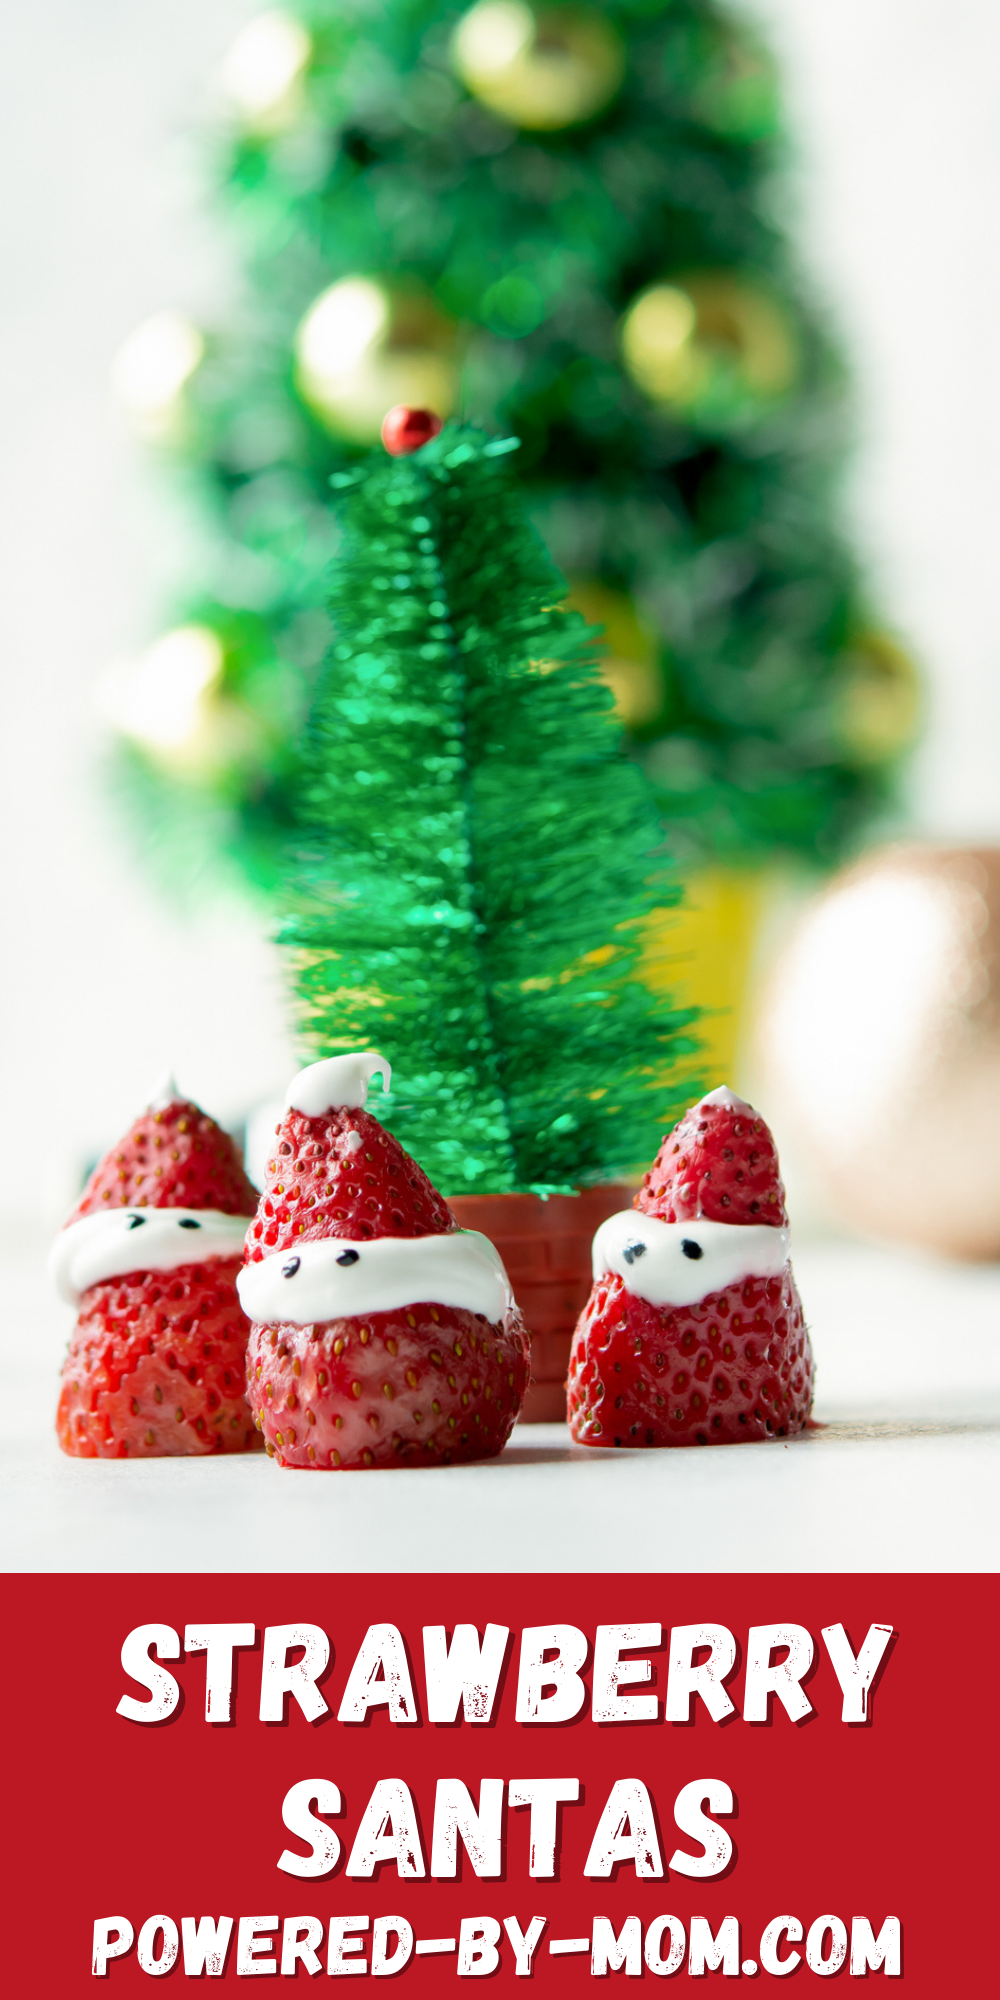 Hurray for an easy holiday dessert - say hello these cute and yummy Strawberry Santas! It only has 4 ingredients and is super easy to make.